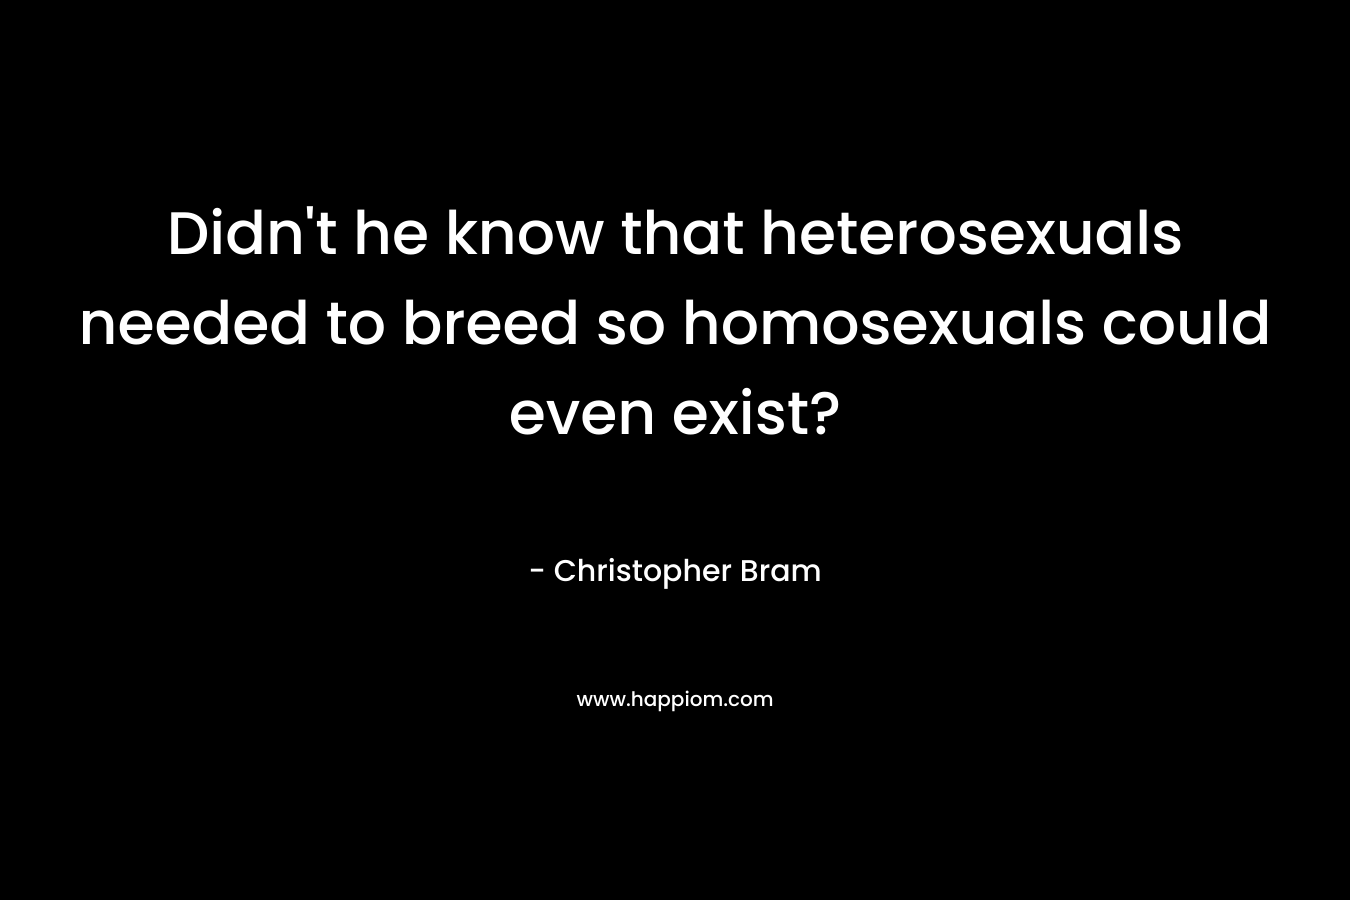 Didn’t he know that heterosexuals needed to breed so homosexuals could even exist? – Christopher Bram